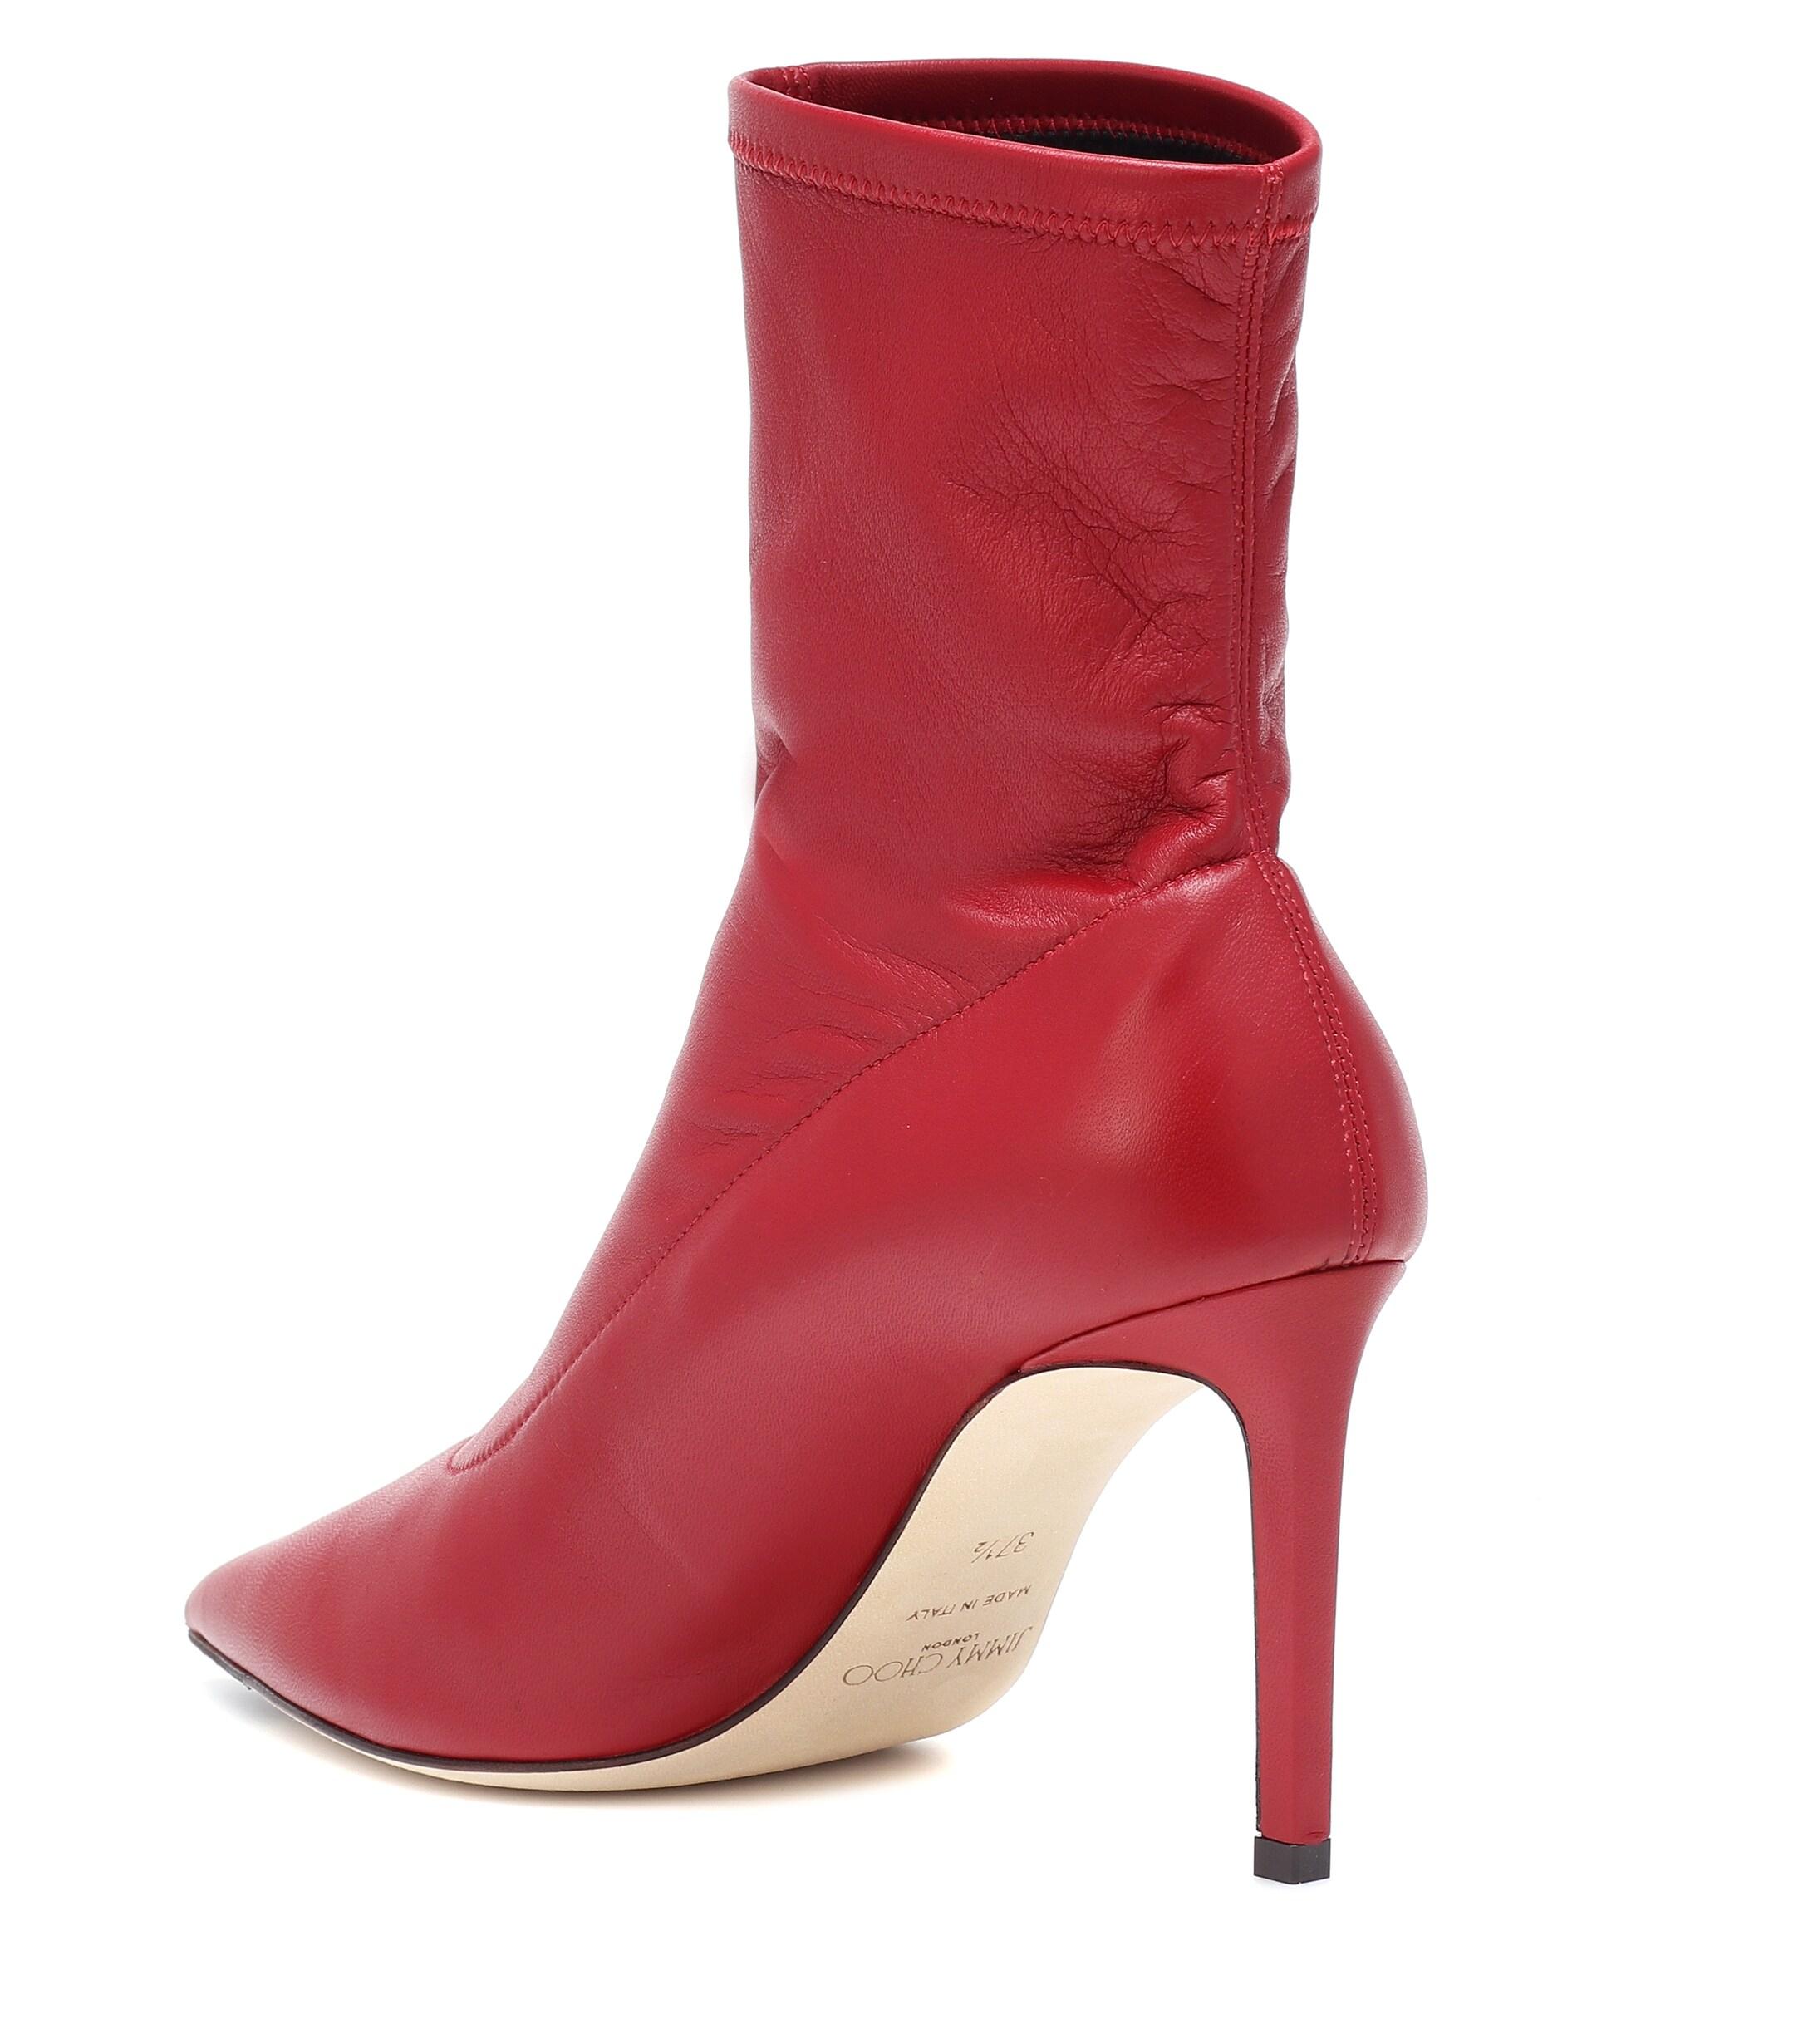 Jimmy Choo Brin 85 Leather Ankle Boots in Red - Lyst